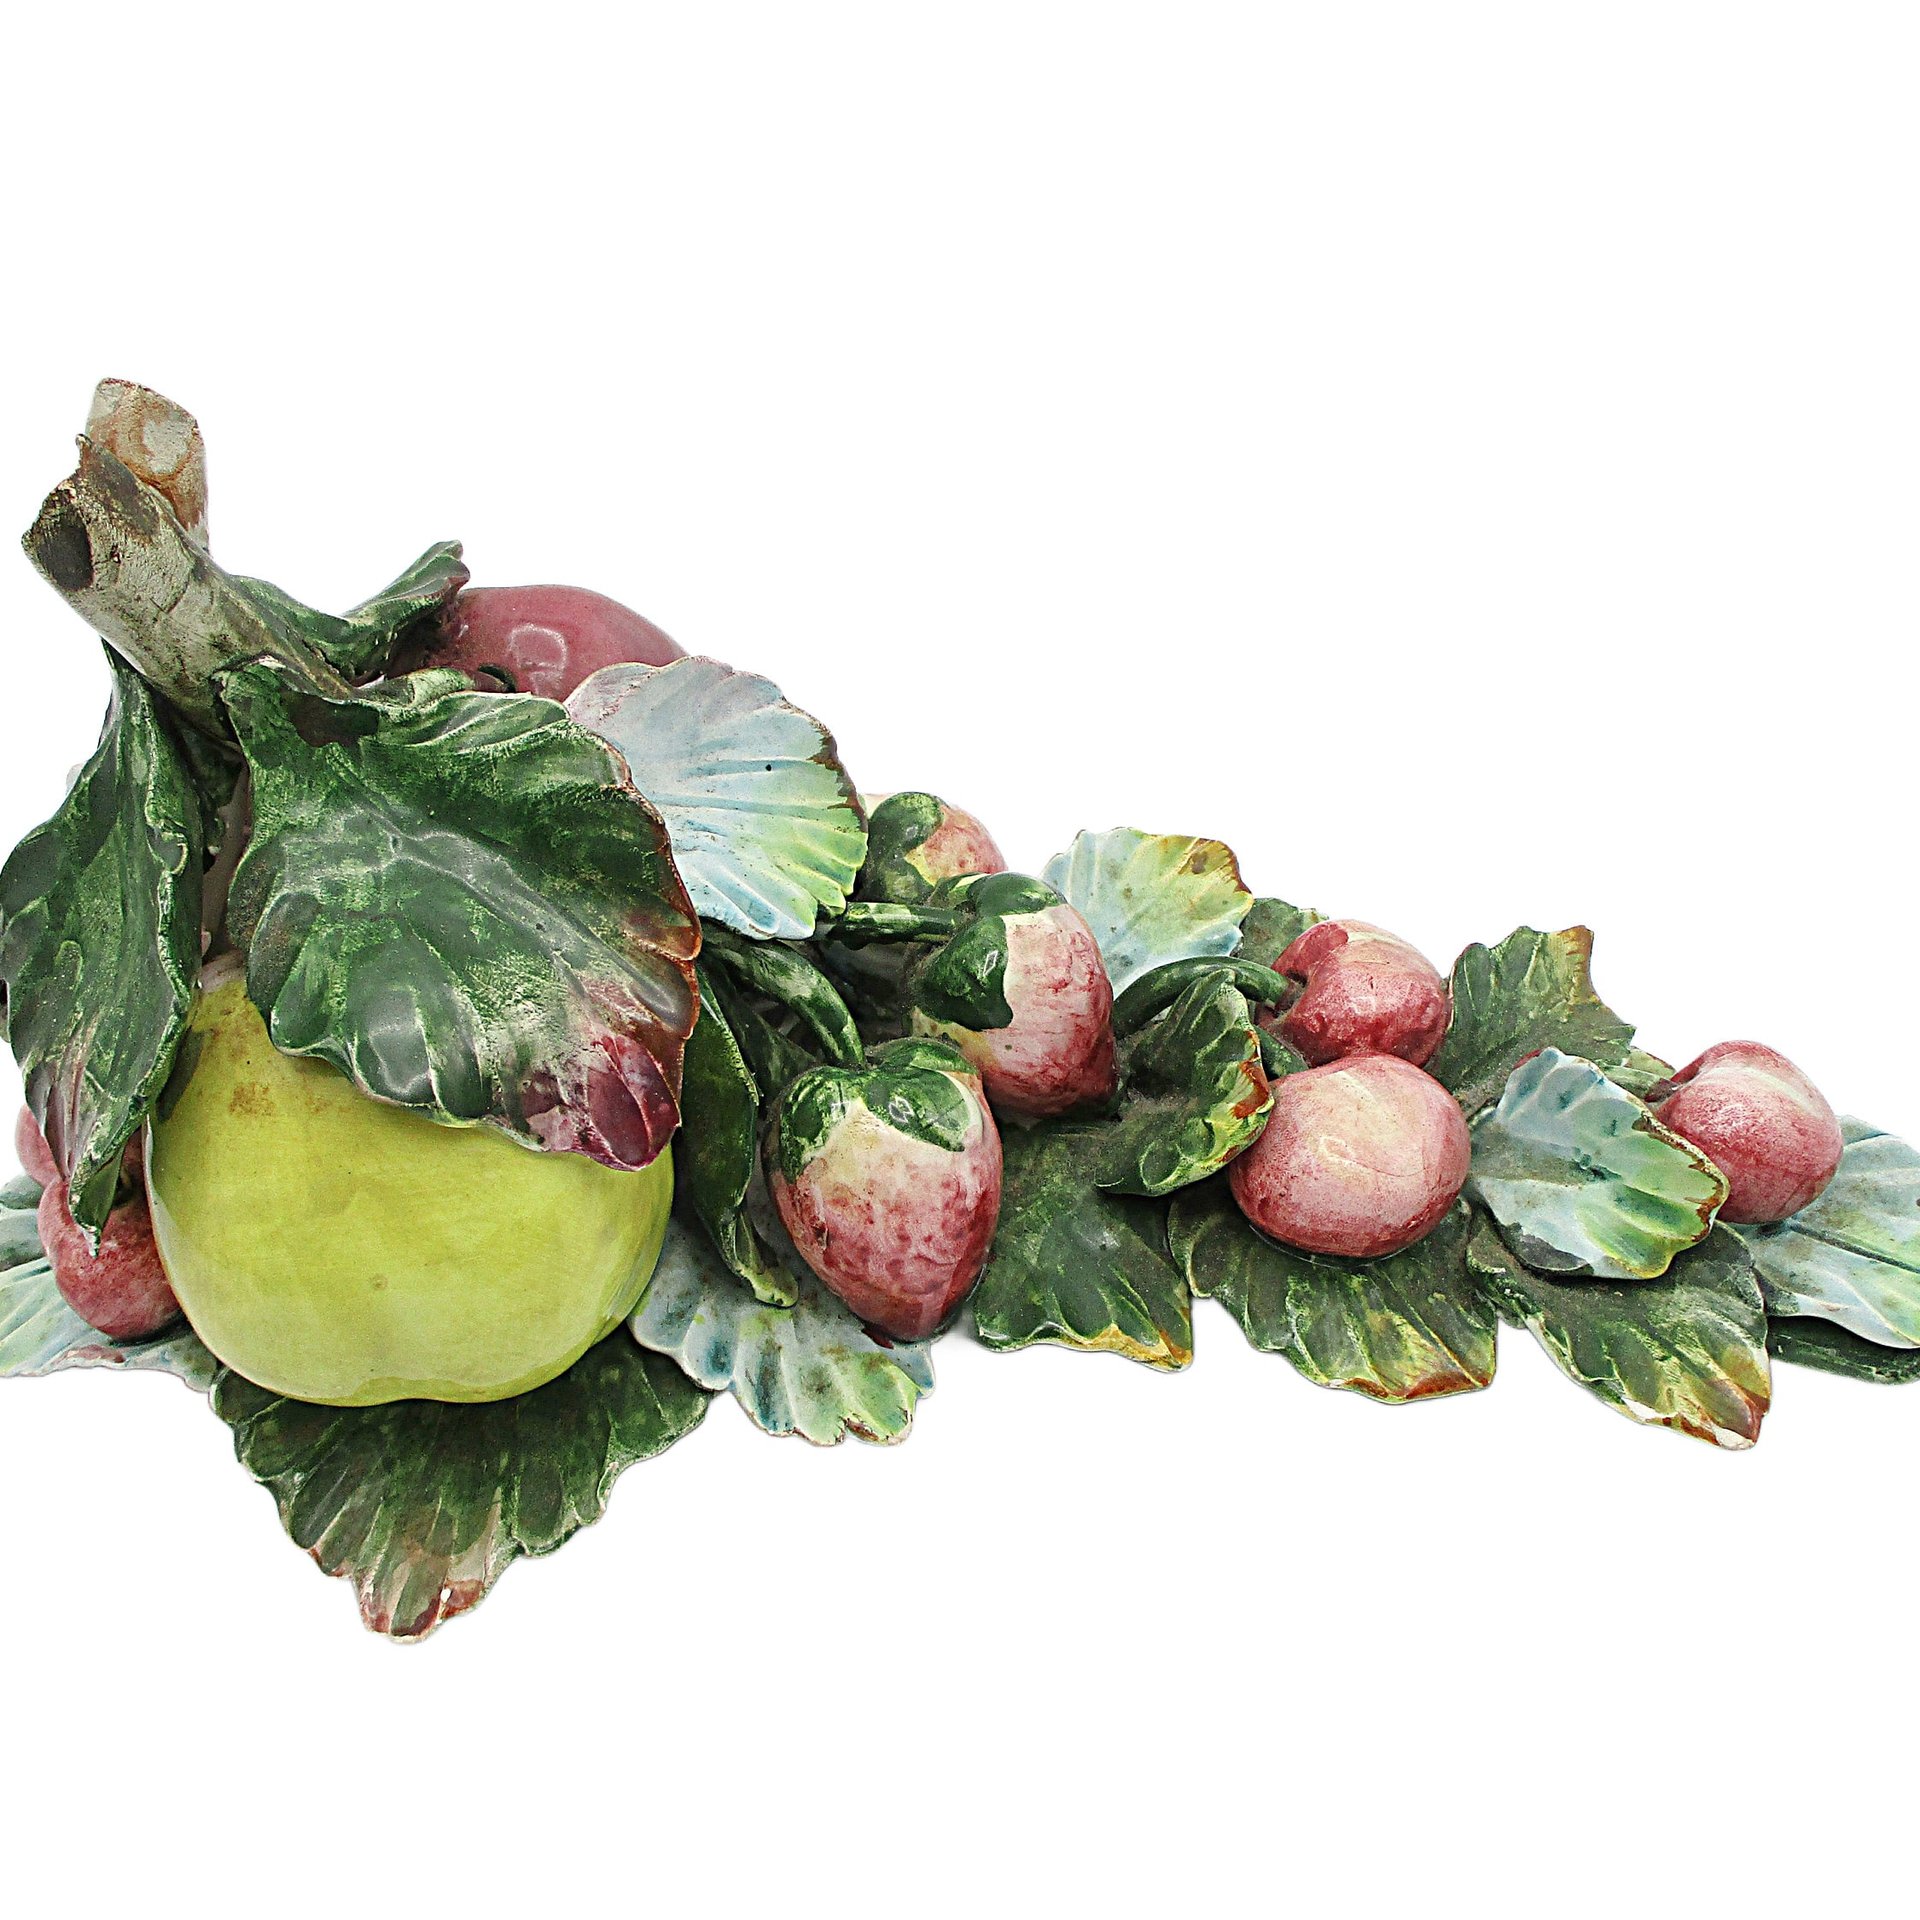 Majolica Fruit Spray Made in Italy, Tabletop Cluster Apple Lemon Cherries and Strawberries Hand Painted, Wall Hanging, Tablescaping, 2 Avail